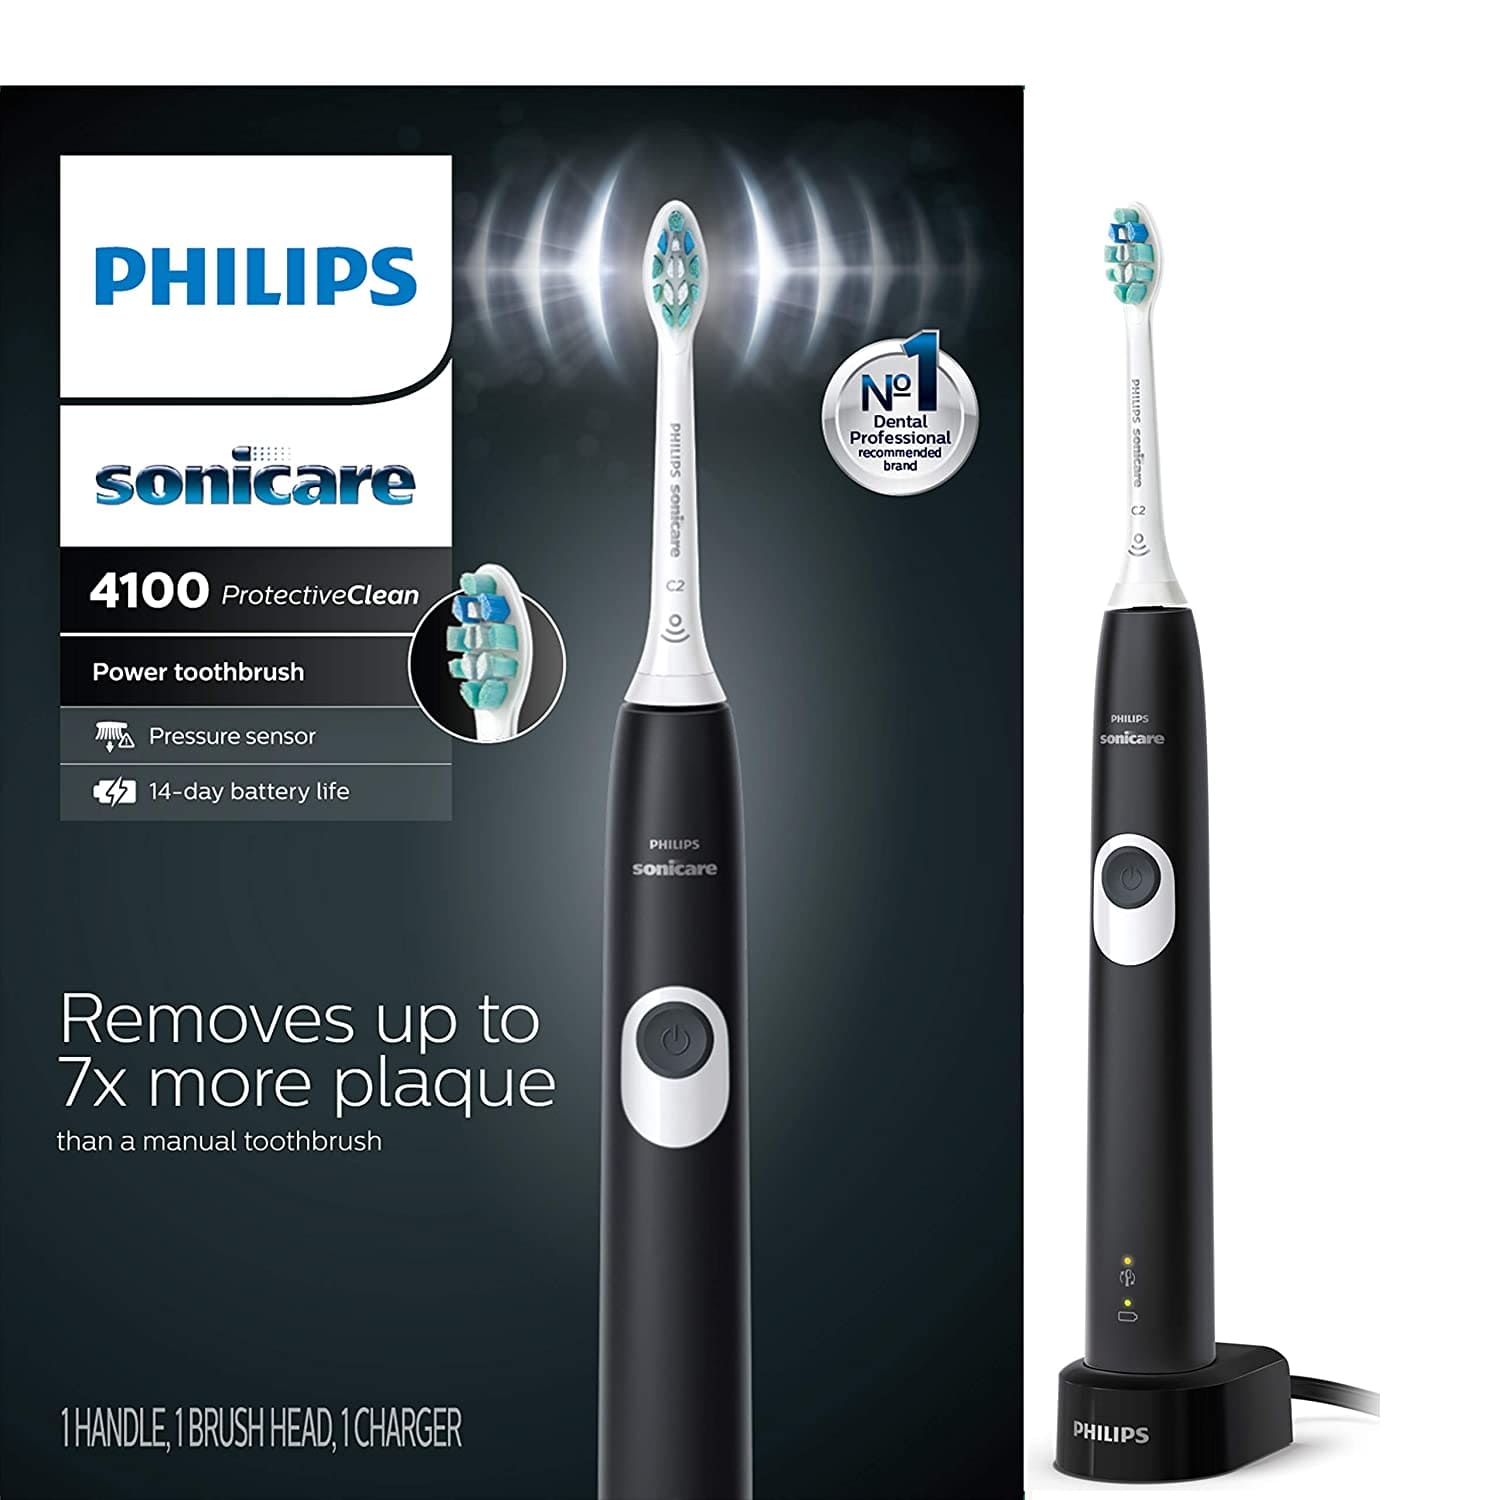 Philips sonicare protective clean 4100